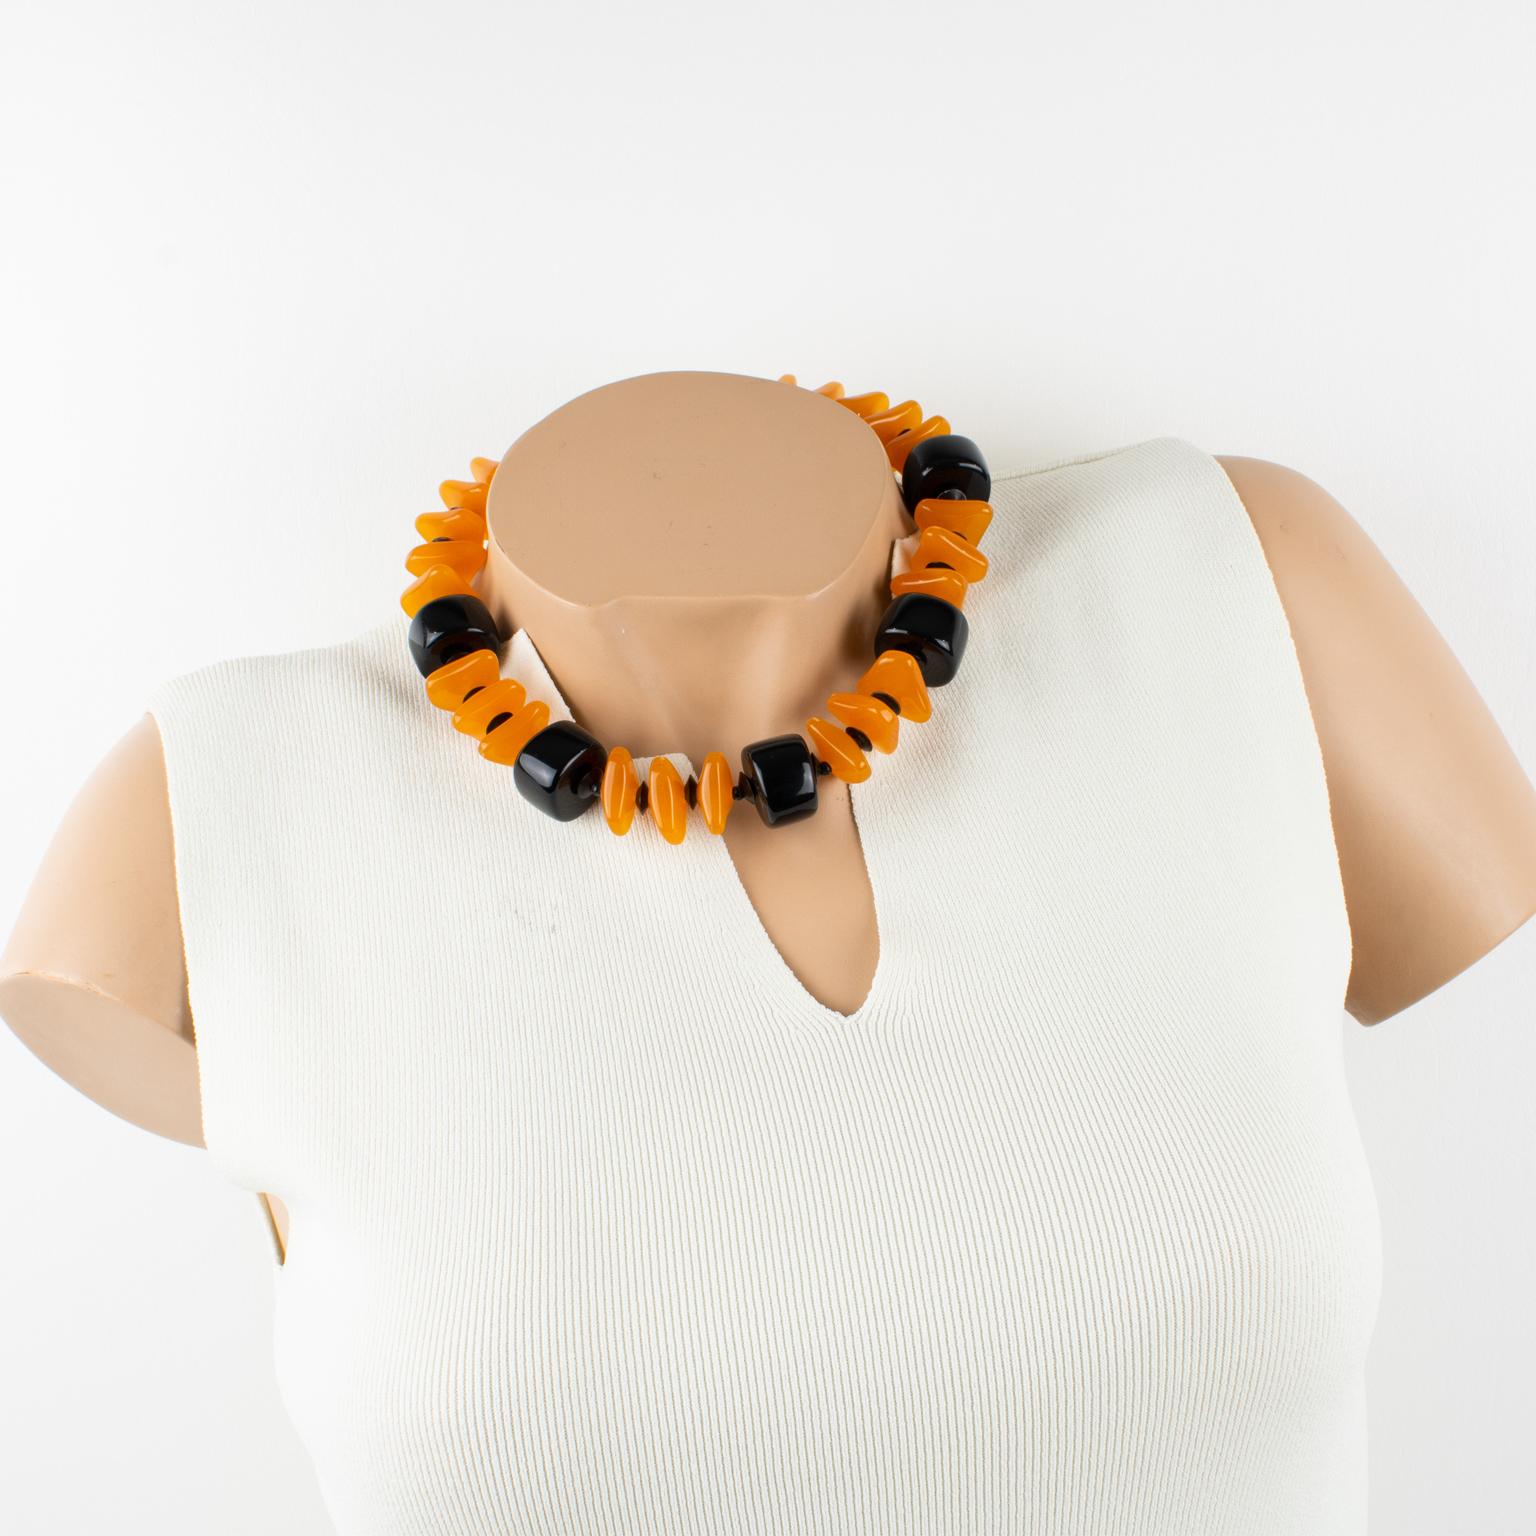 Elegant Angela Caputi, made in Italy resin choker necklace. Working on the cantaloupe orange color resin with black contrast, each bead is carved, dimensional, and geometric. Her color matching is always extremely classy, perfect for casual and